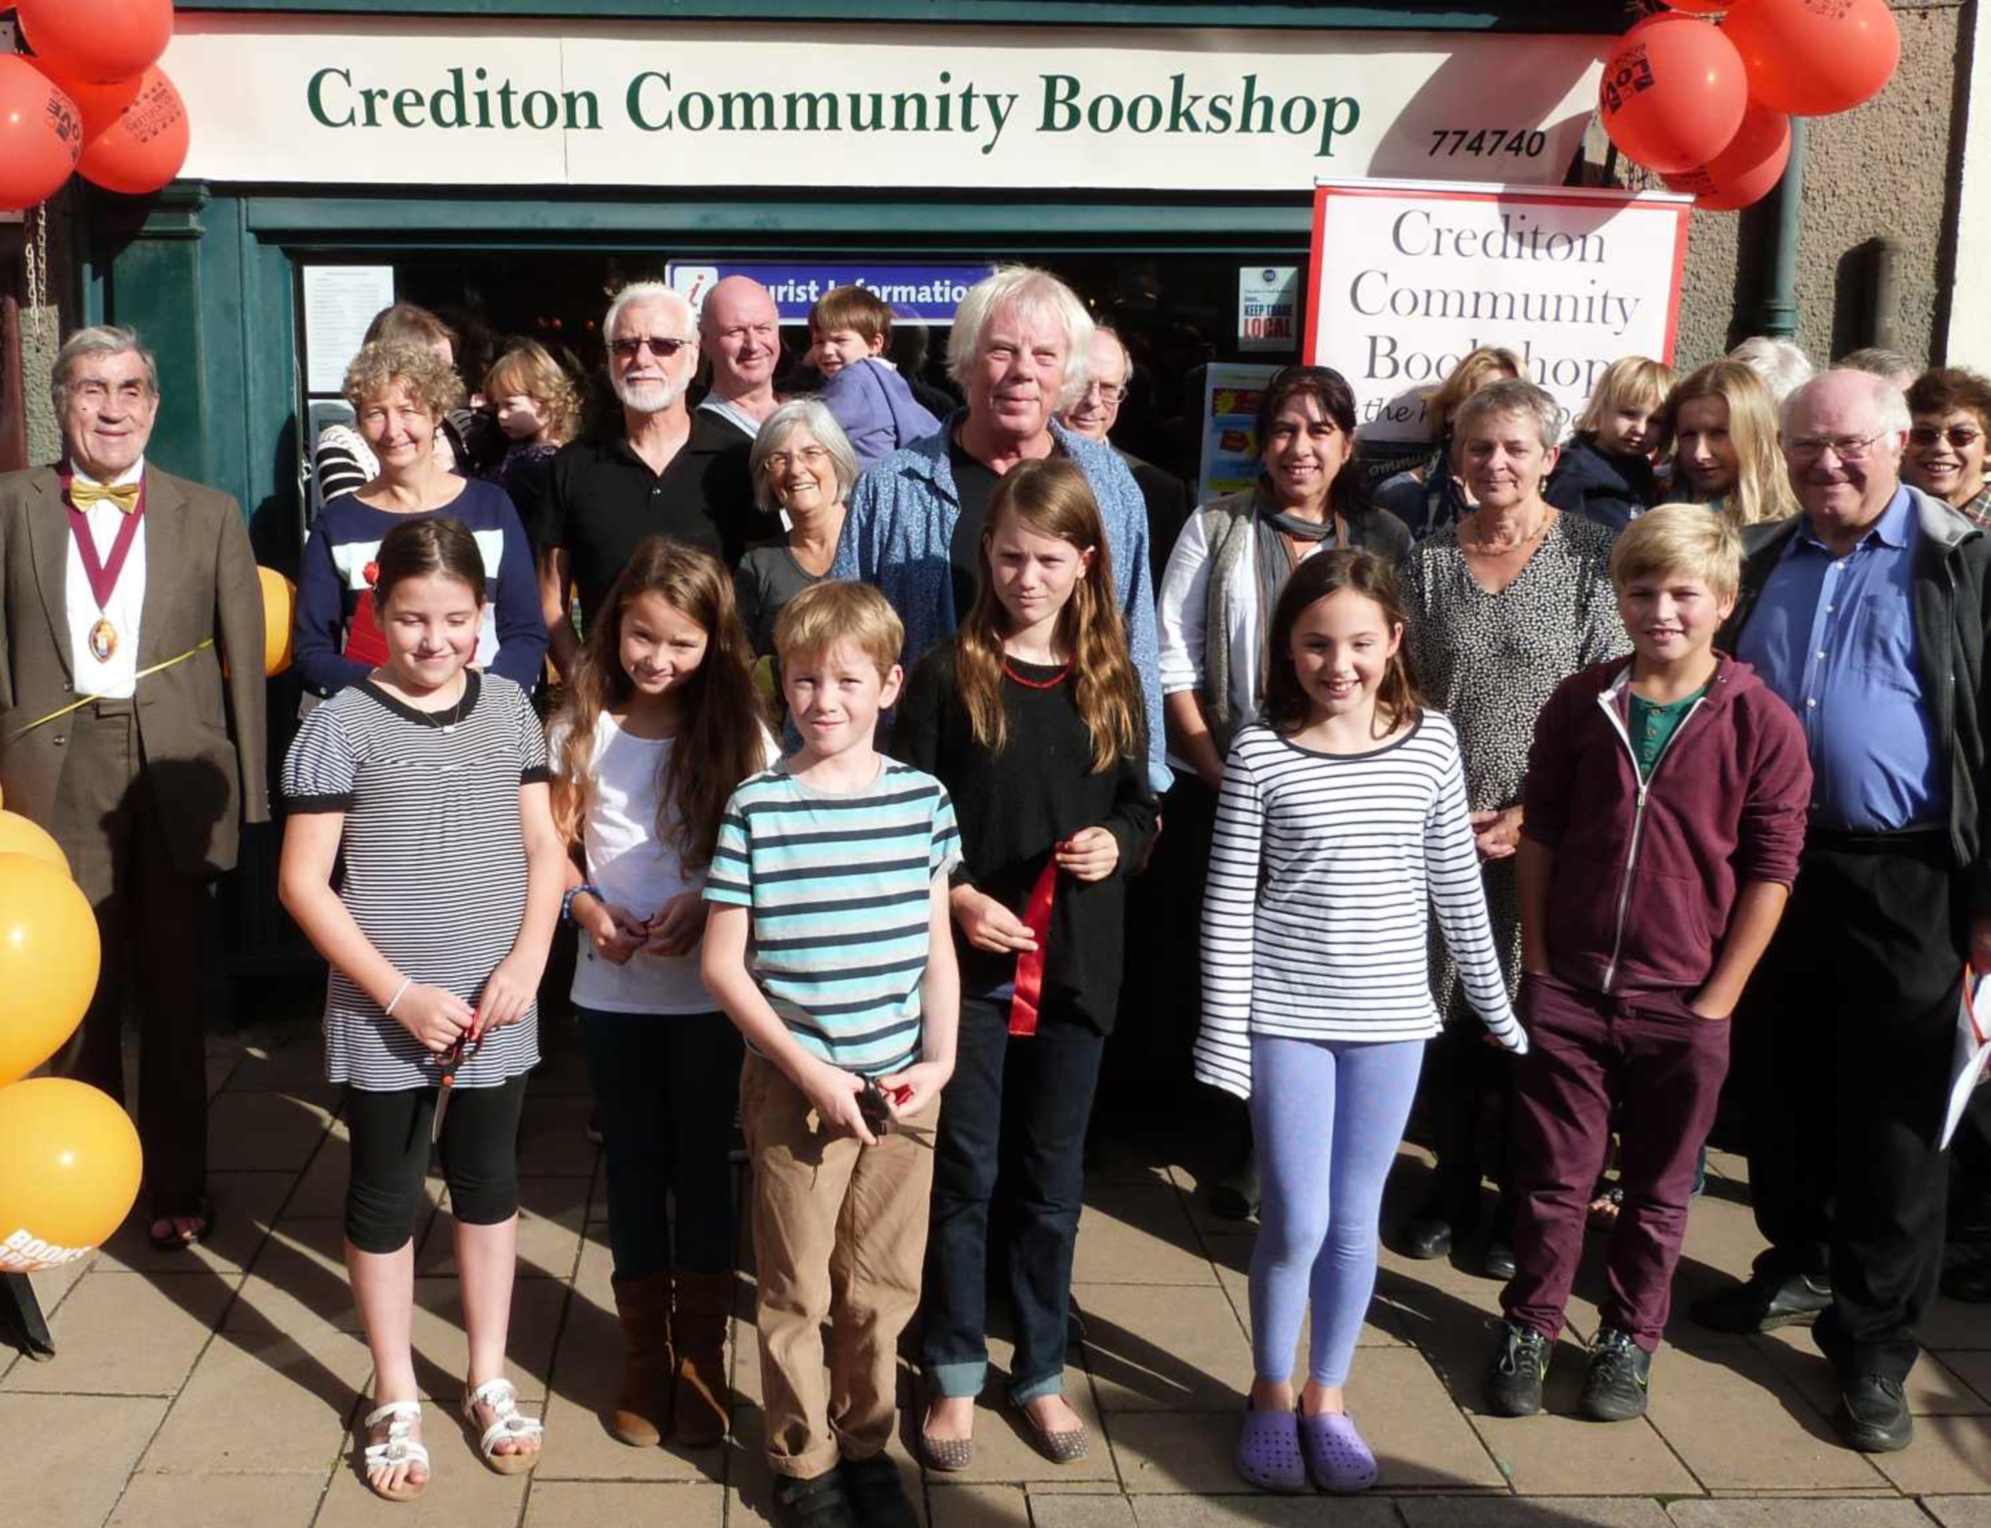 Cutting the ribbon at the Community Bookshop Launch, 5 October 2013